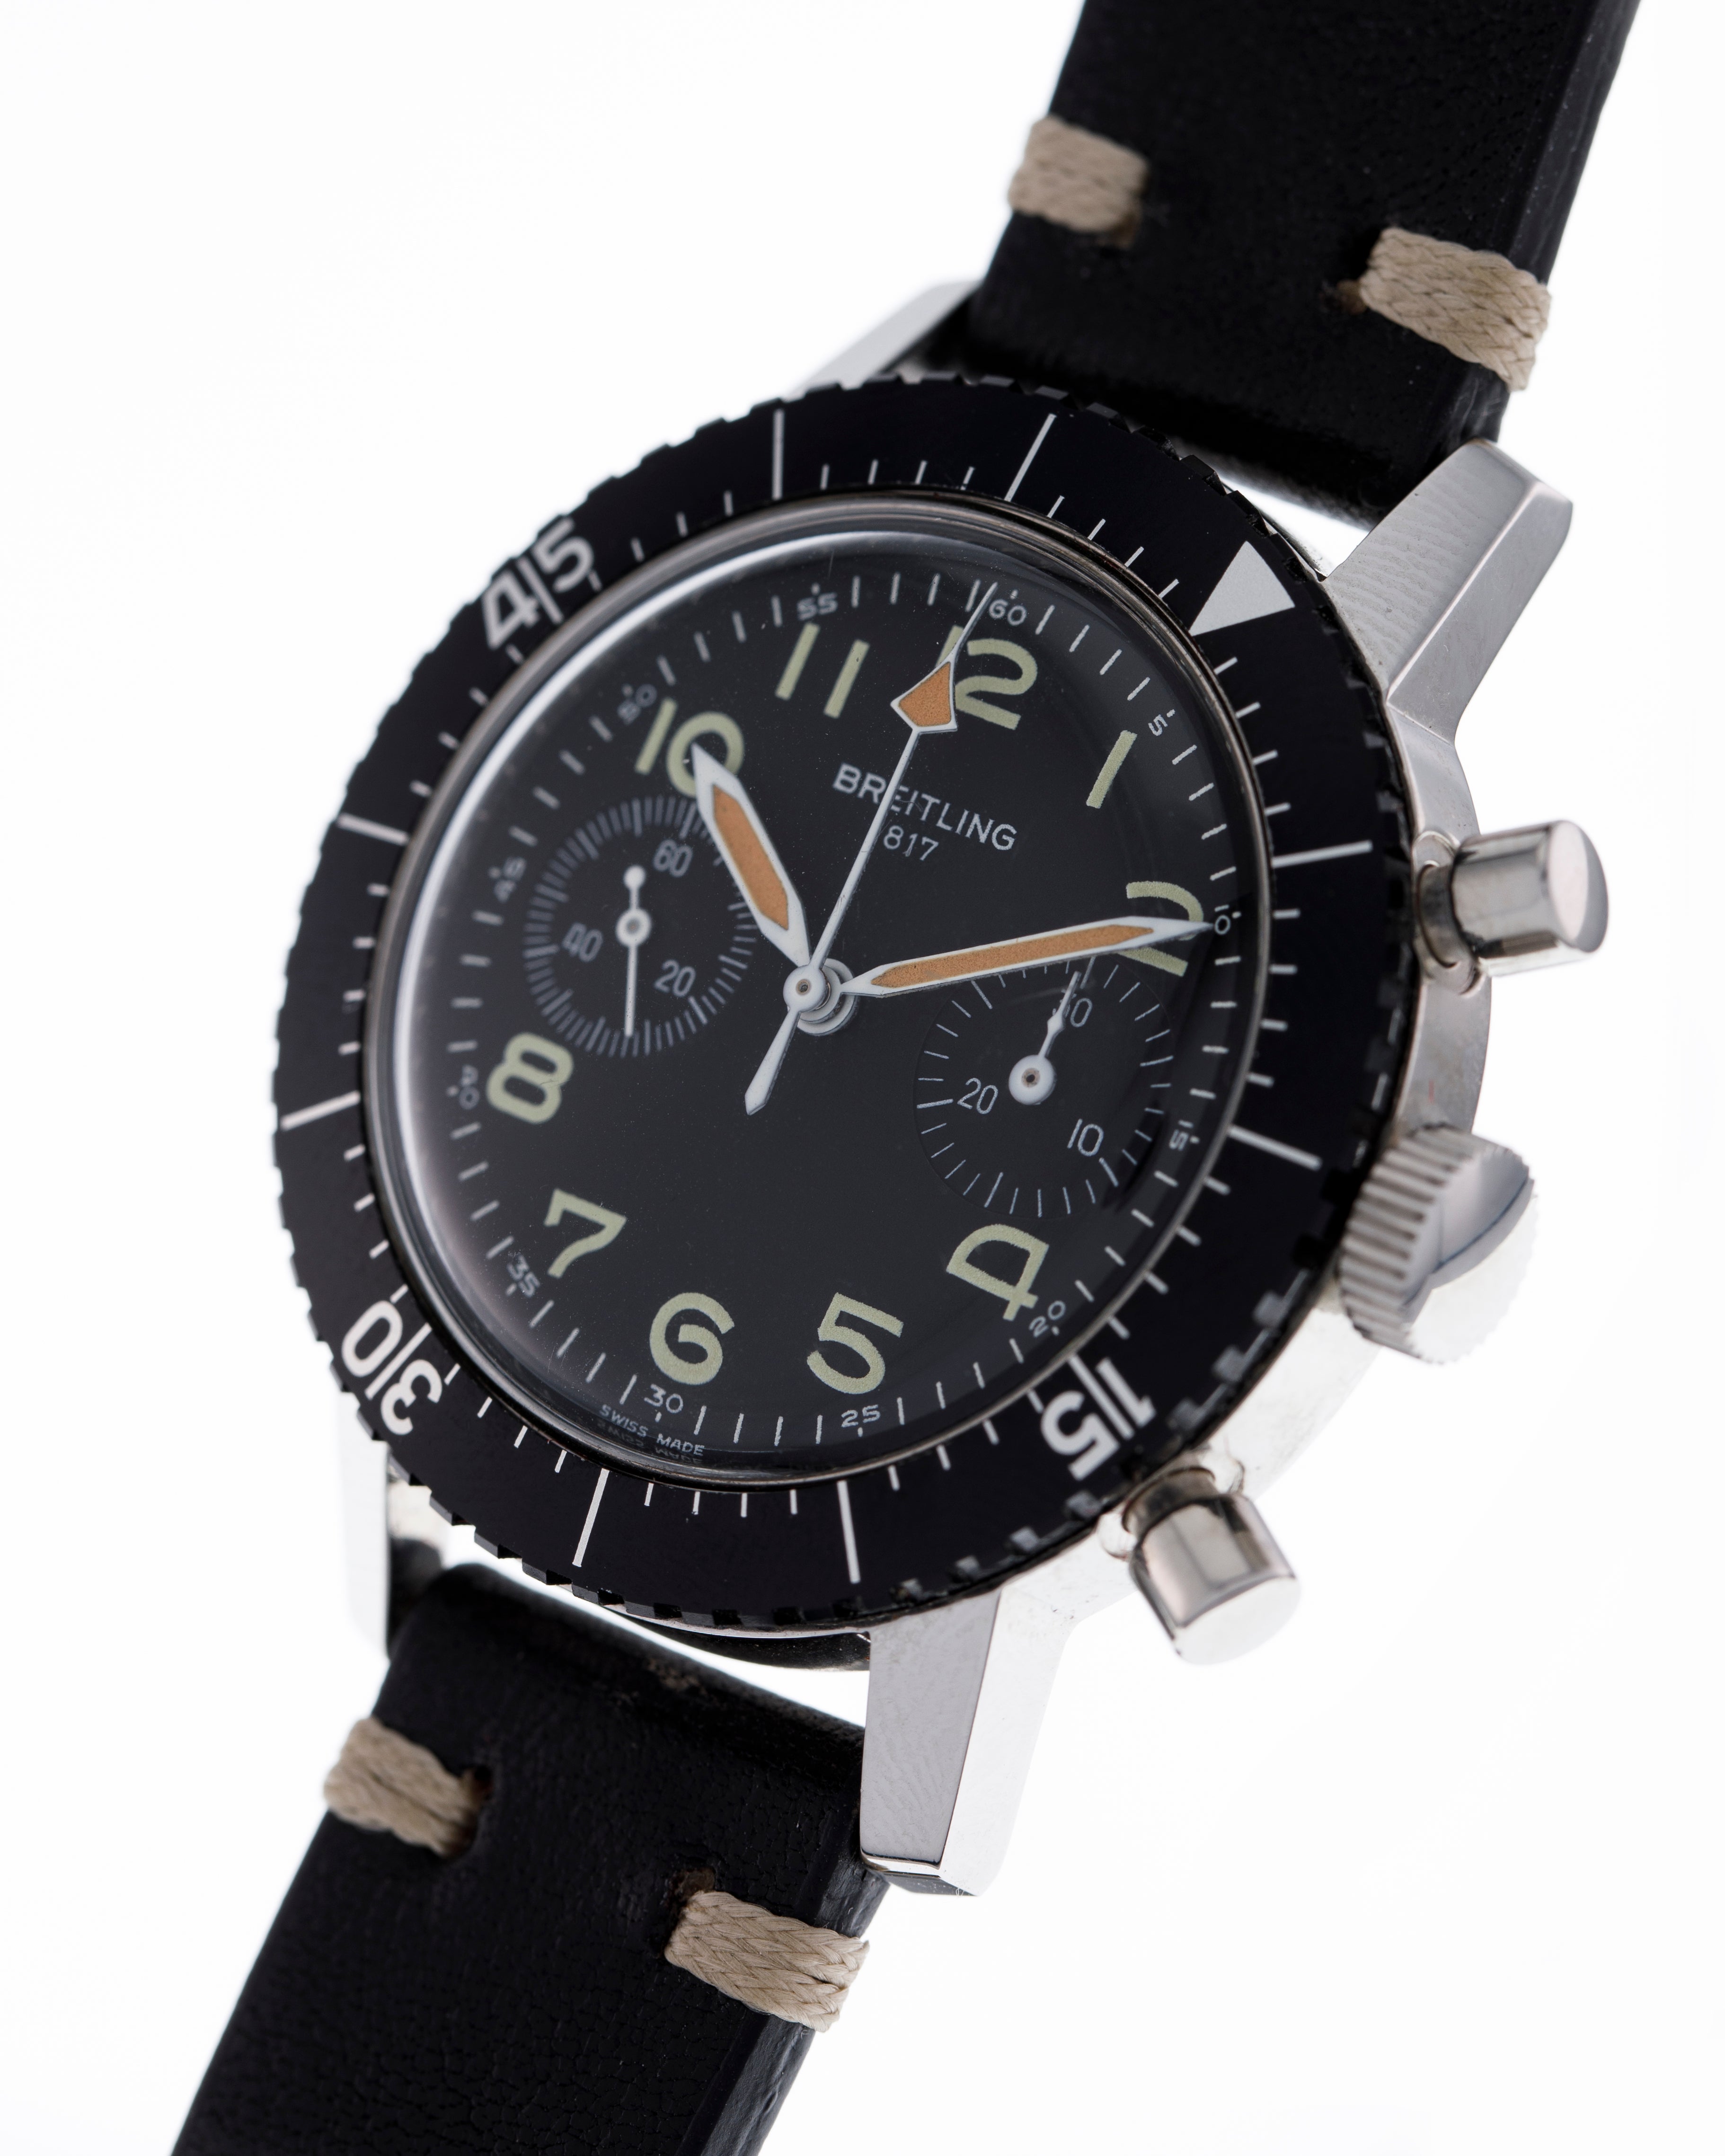 Breitling chronograph retailed for Italian Army